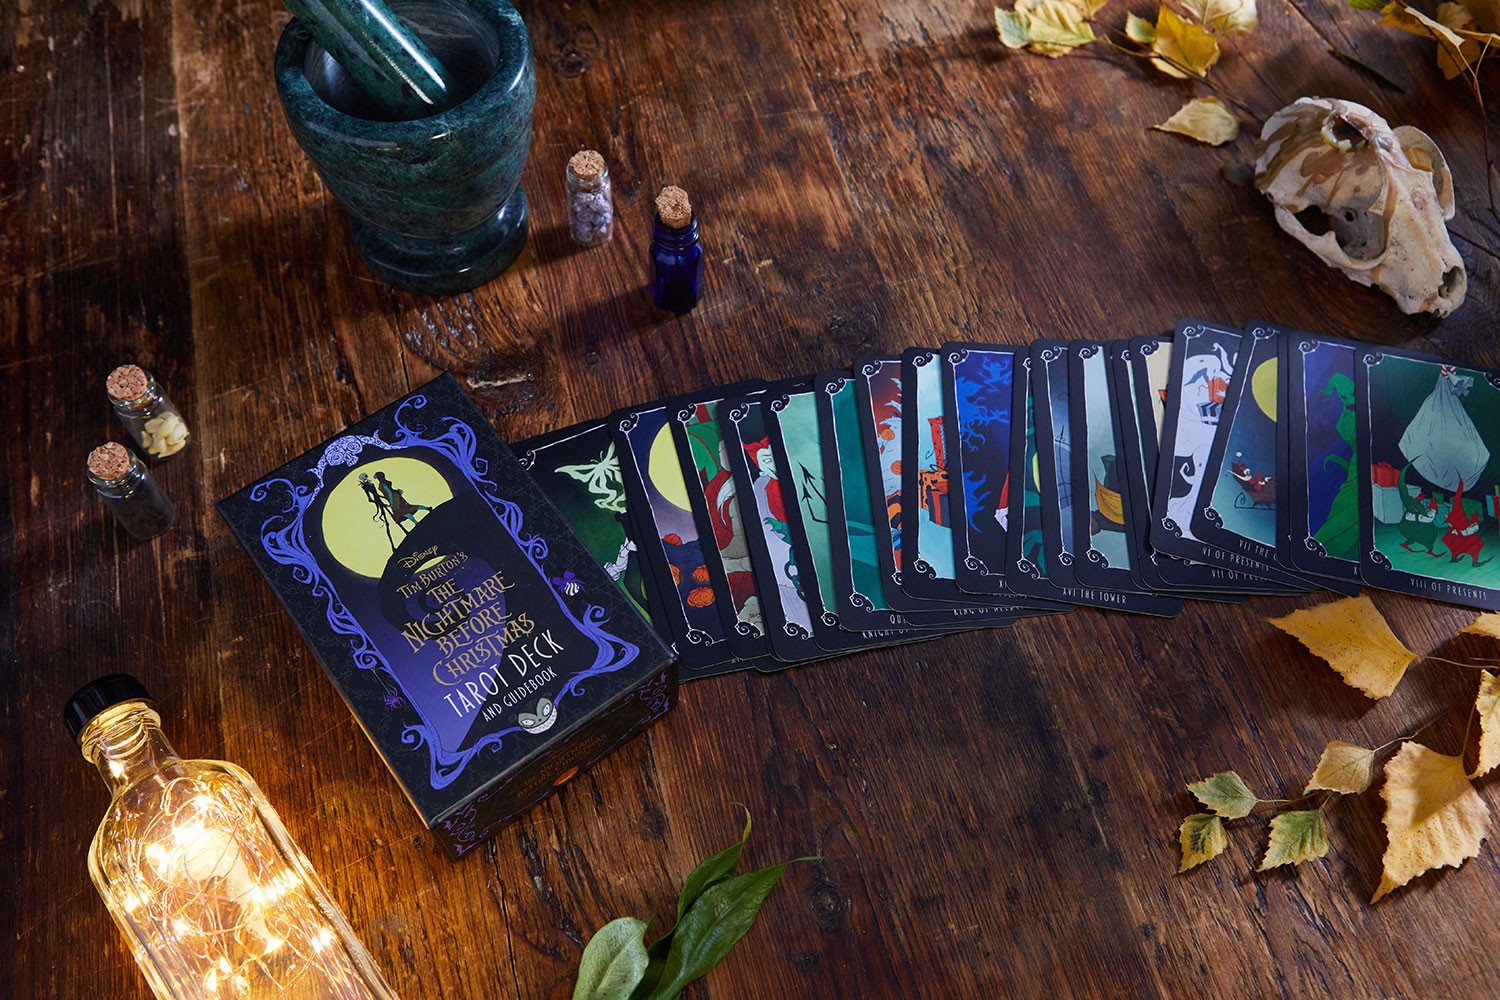 The Nightmare Before Christmas Tarot Deck and Guidebook- Prototype Shown